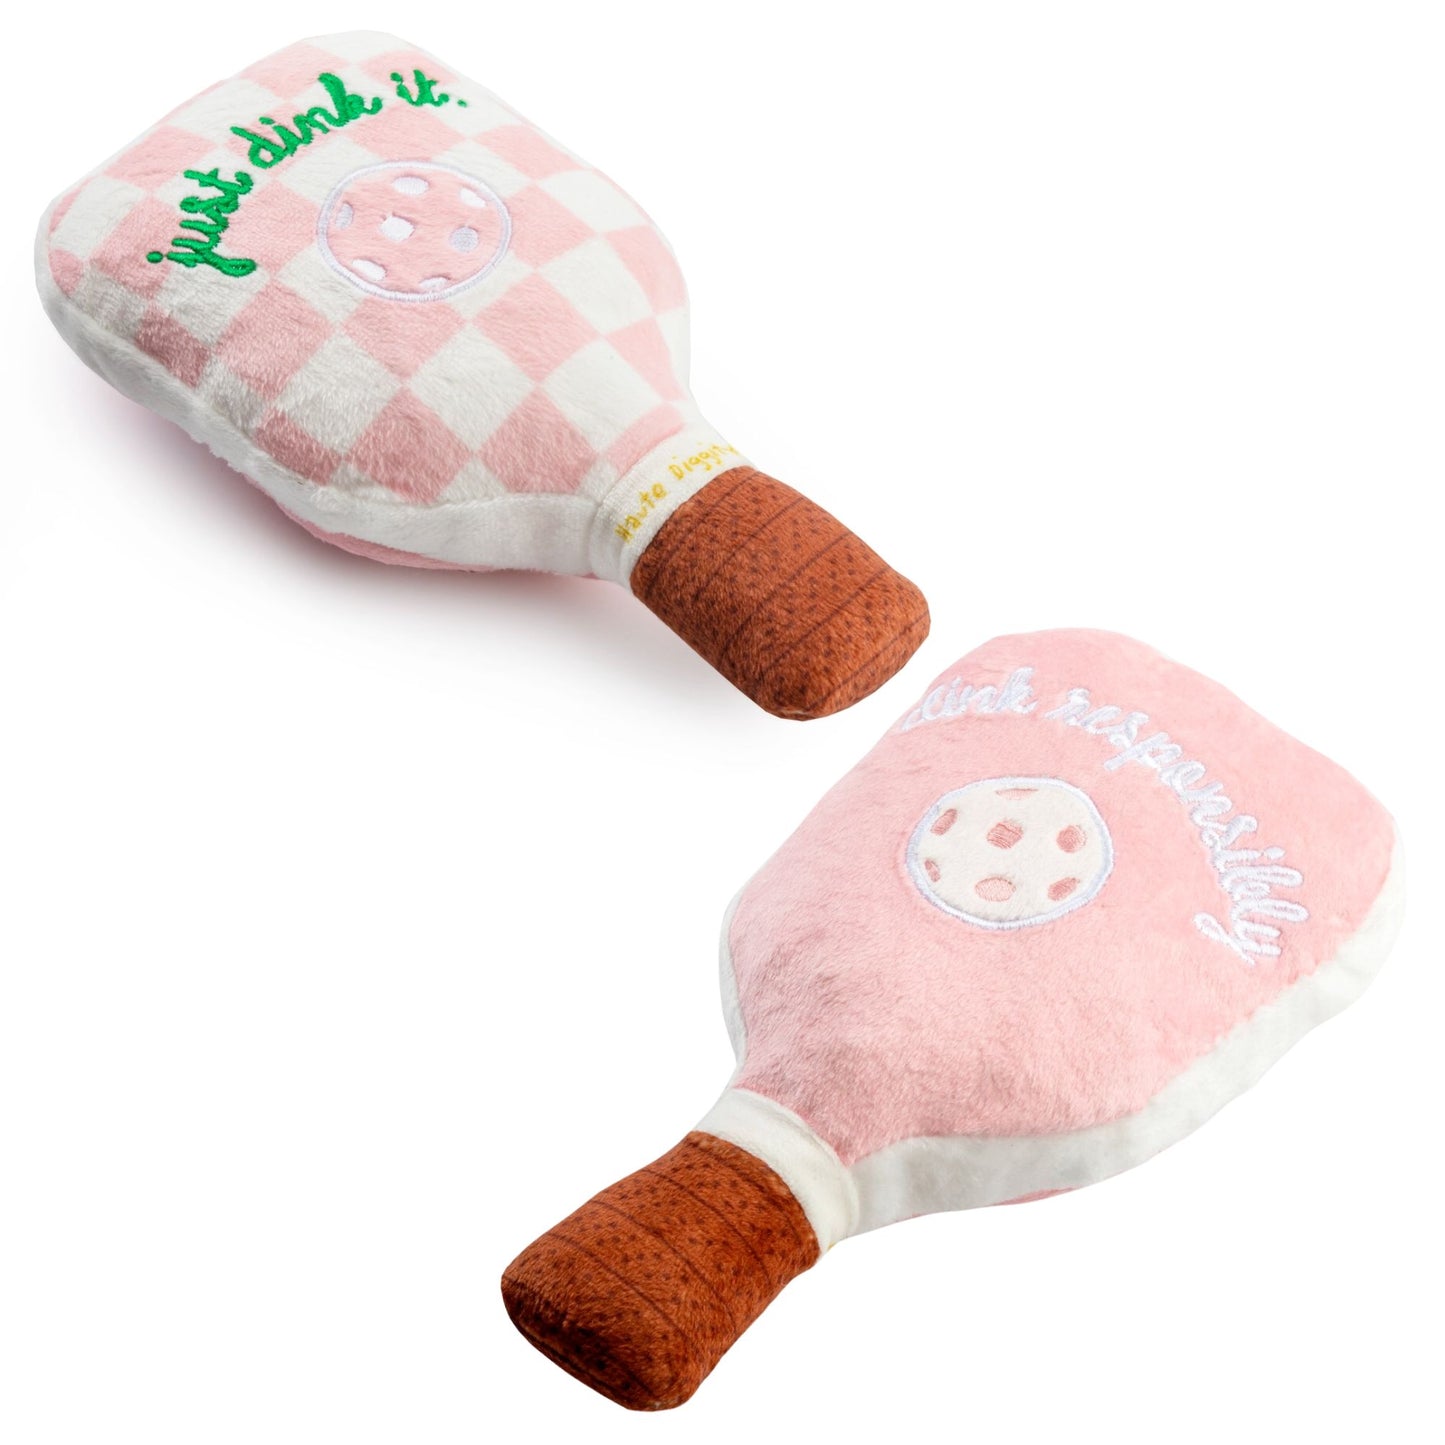 Pink Checker Pickleball Paddle Dog Toy